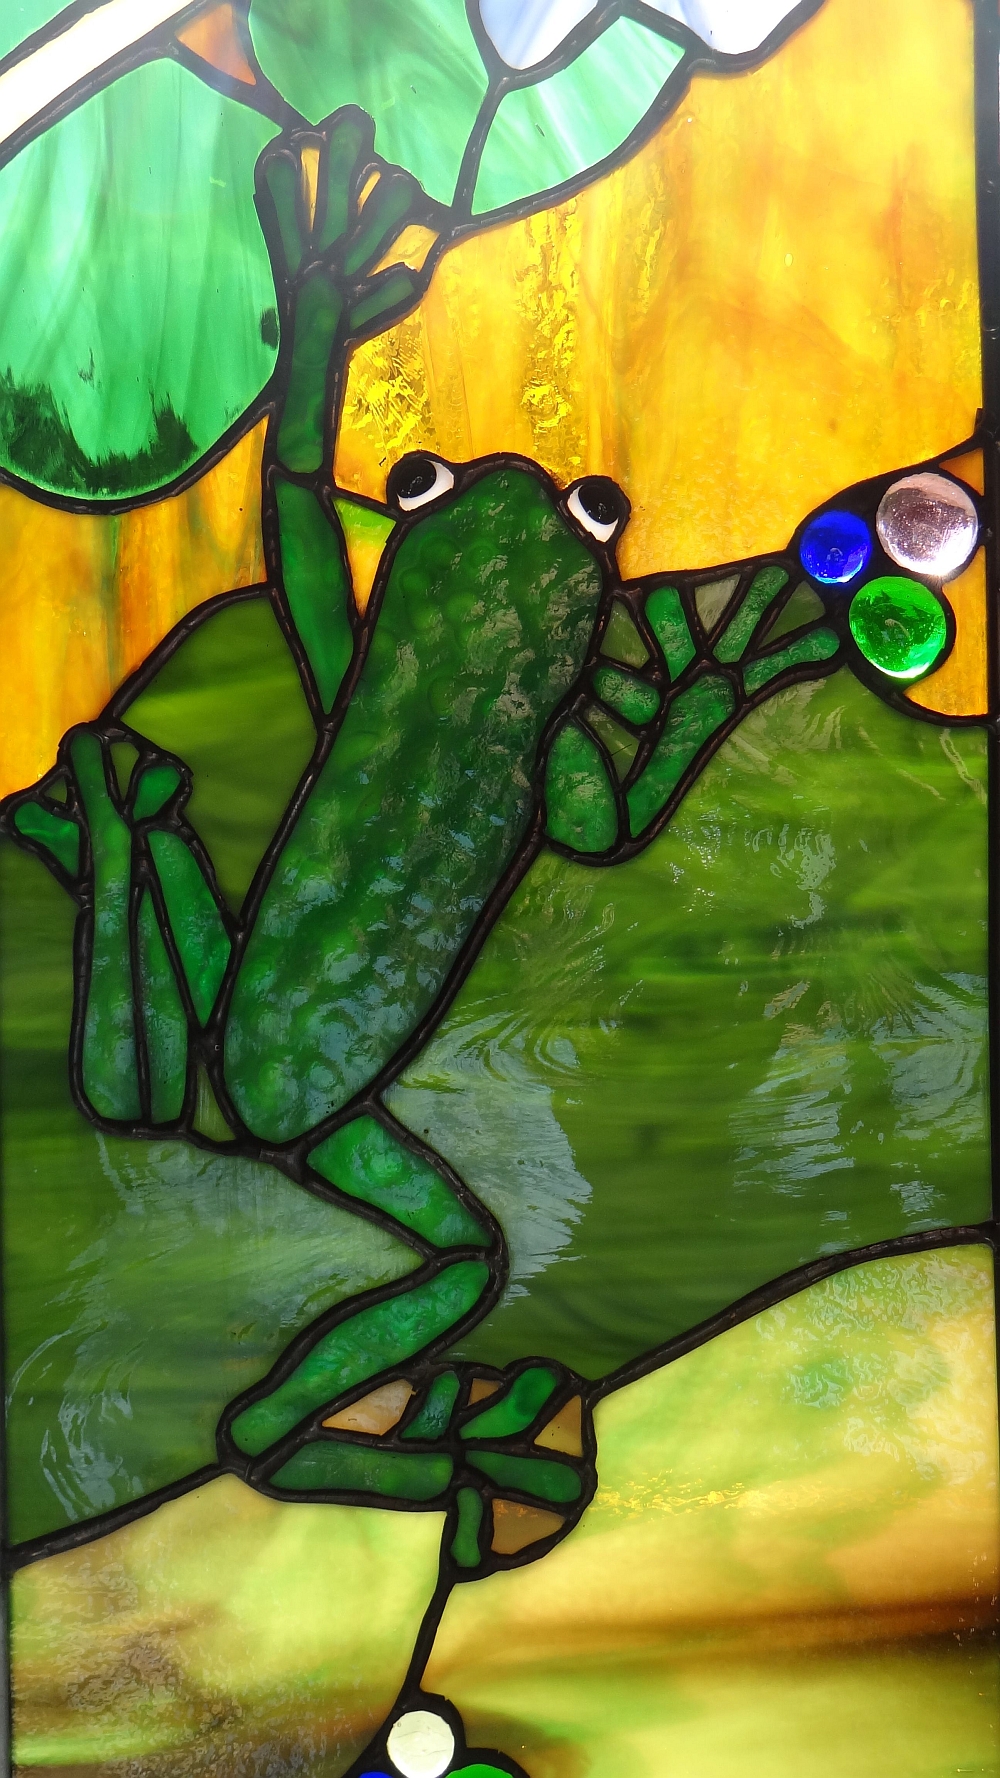 Closeup of the Frog